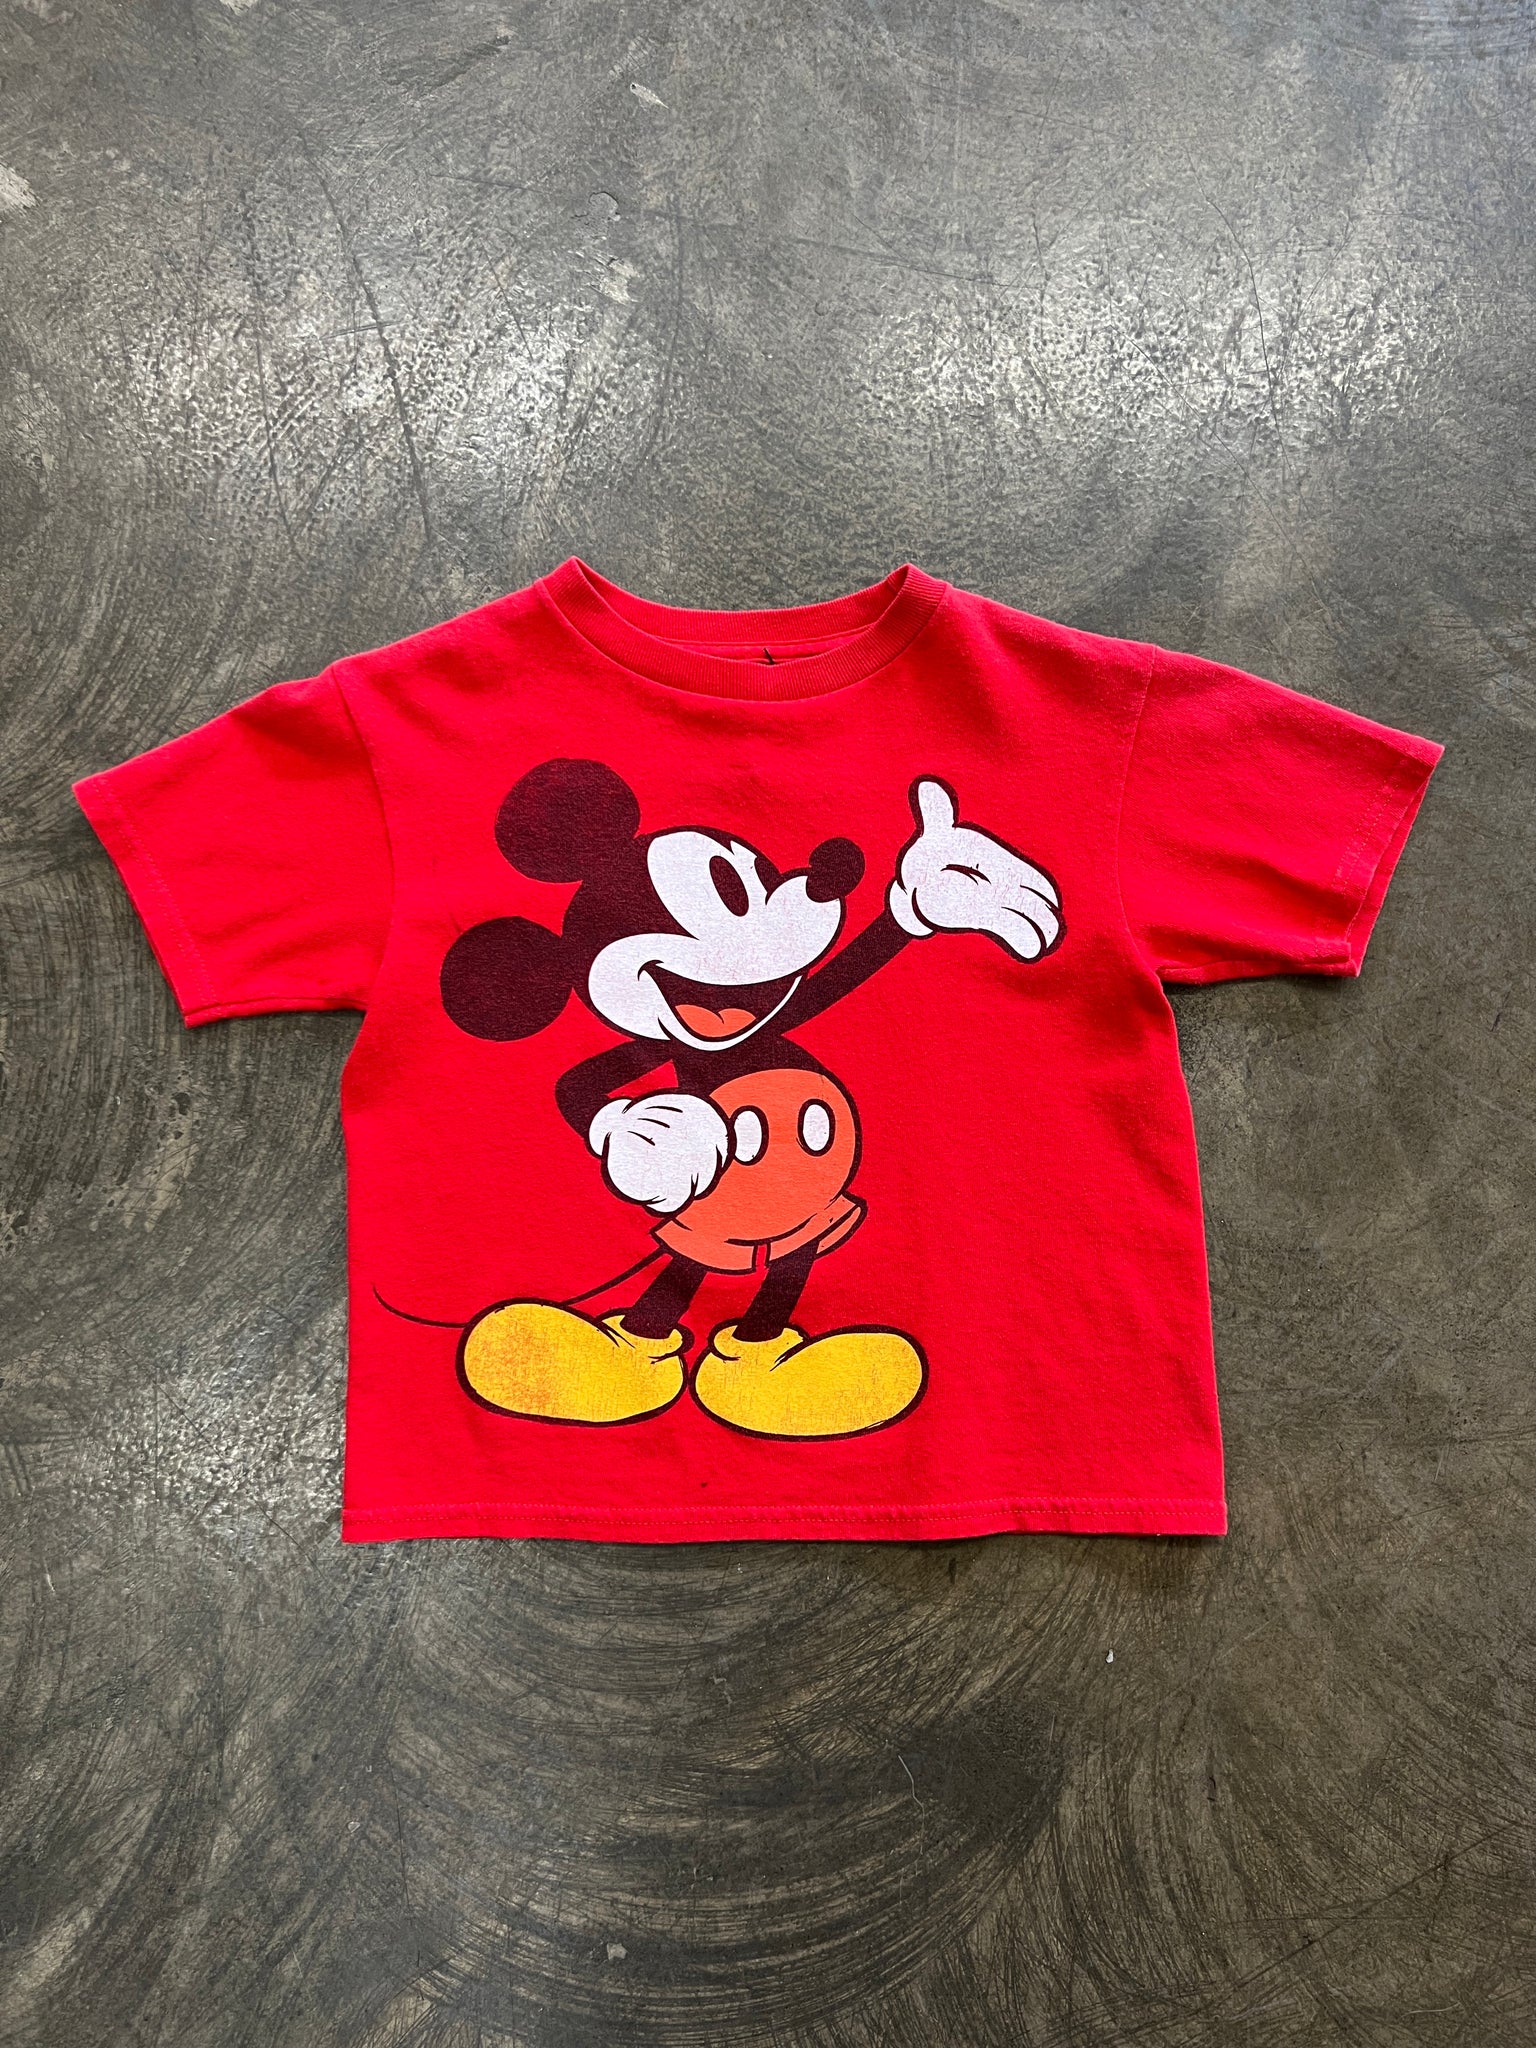 Vintage Mickey Mouse Baby Tee (XS)